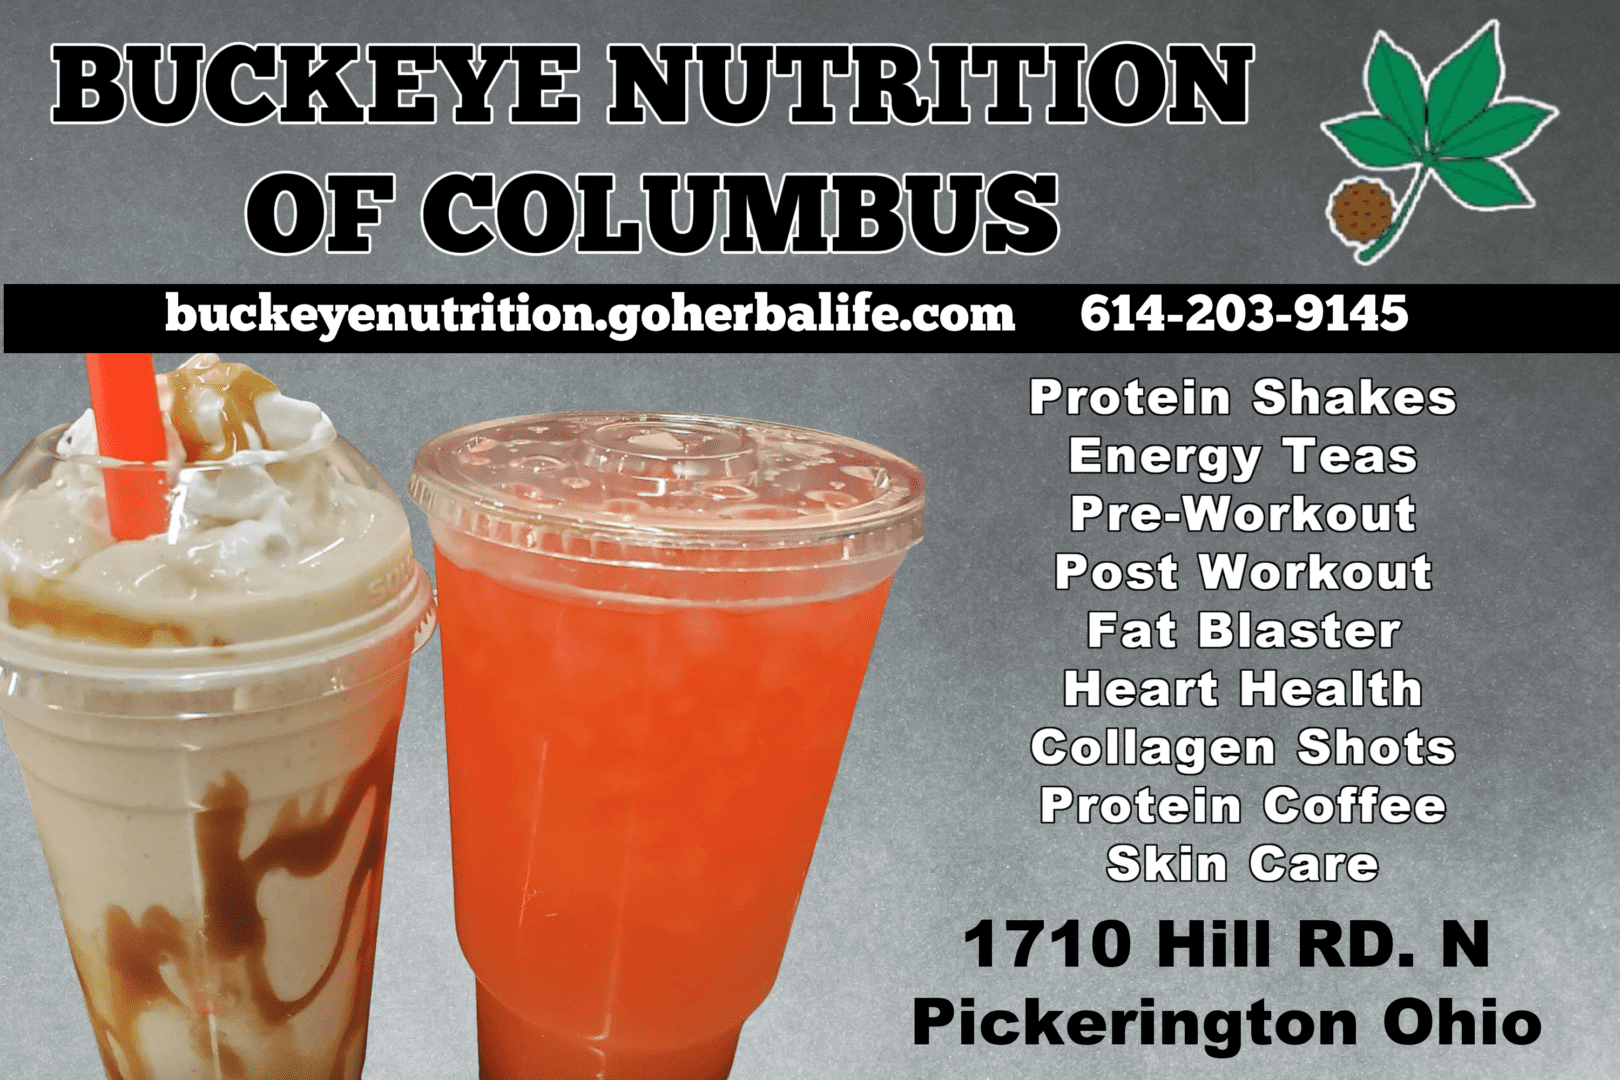 A poster of buckeye nutrition of columbus